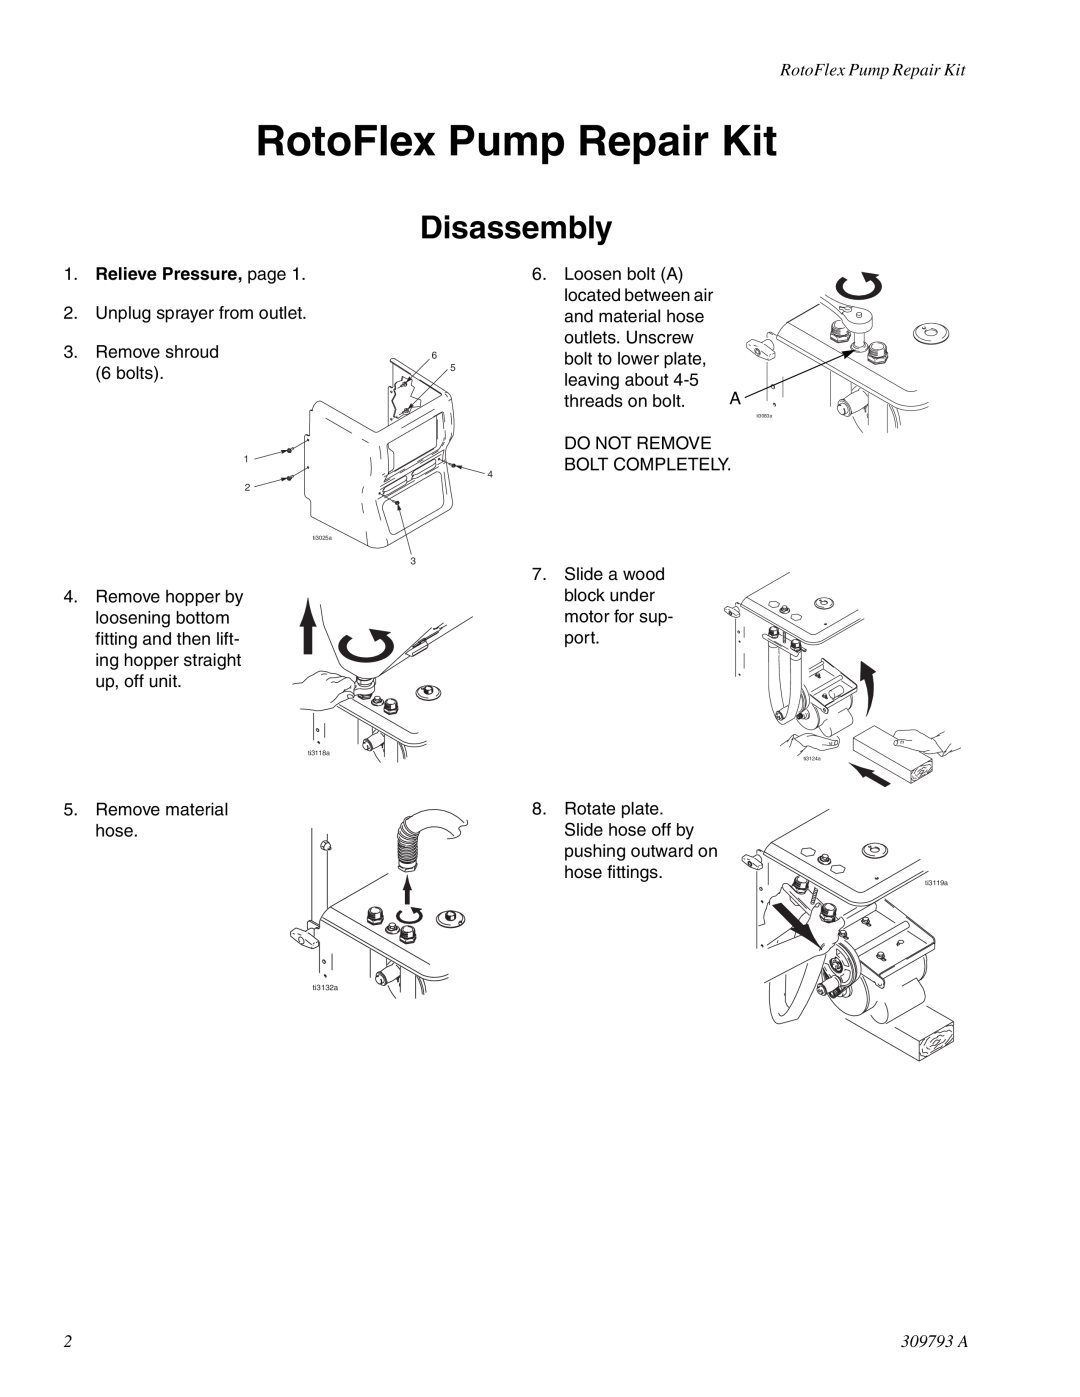 Graco 309793 A manual Disassembly, RotoFlex Pump Repair Kit, Relieve Pressure, page 